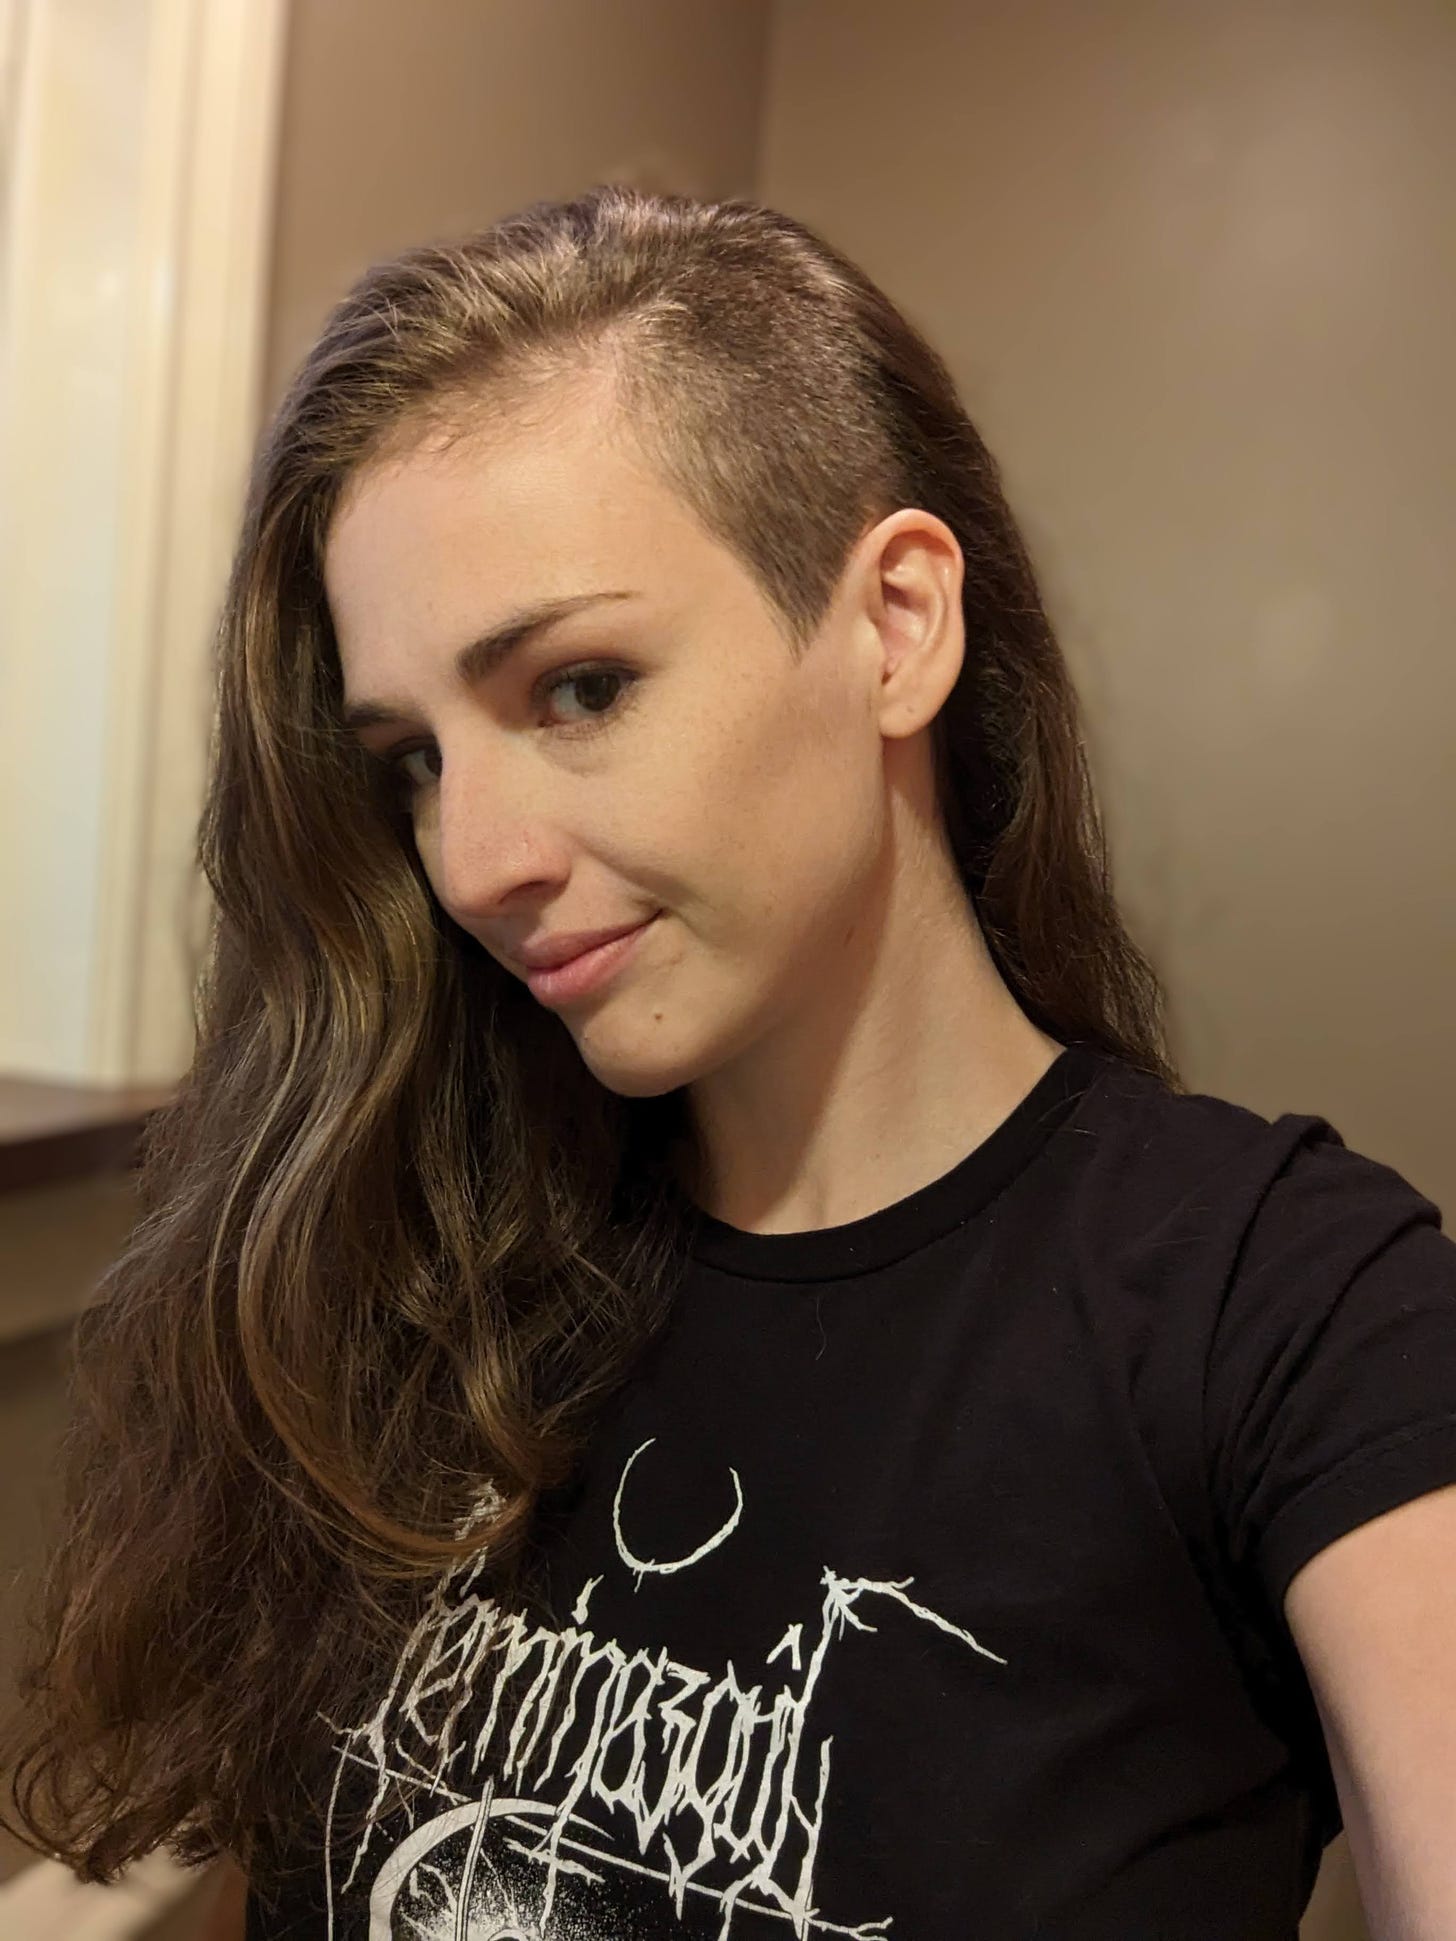 Molly White, a white woman with long brown hair that's shaved on one side. She's wearing a black t-shirt with the logo of the band Feminazgul on it in white.